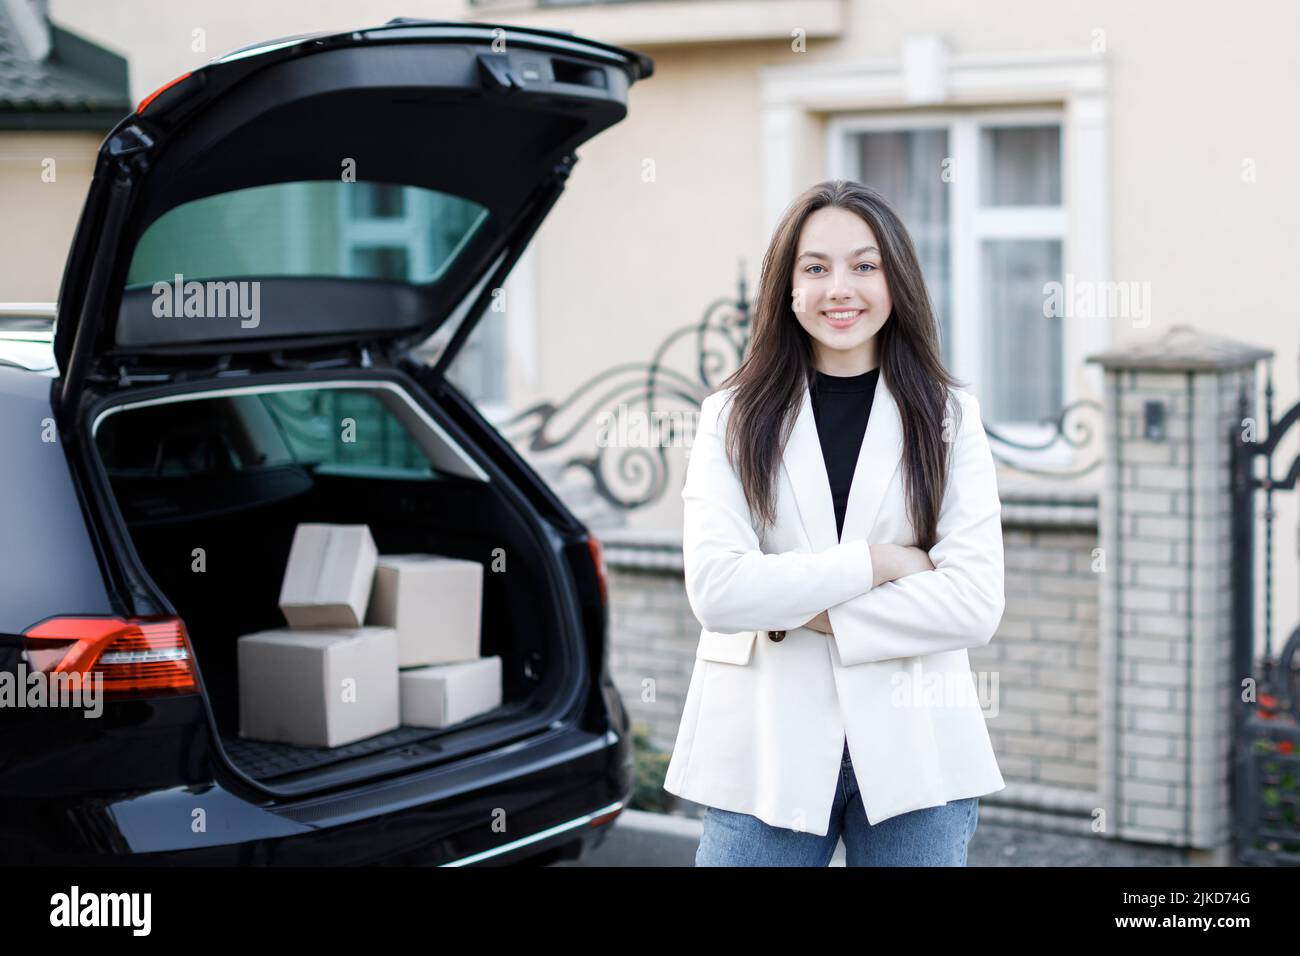 A young girl stands near the open trunk of a car, looks at the camera and smiles. Stock Photo